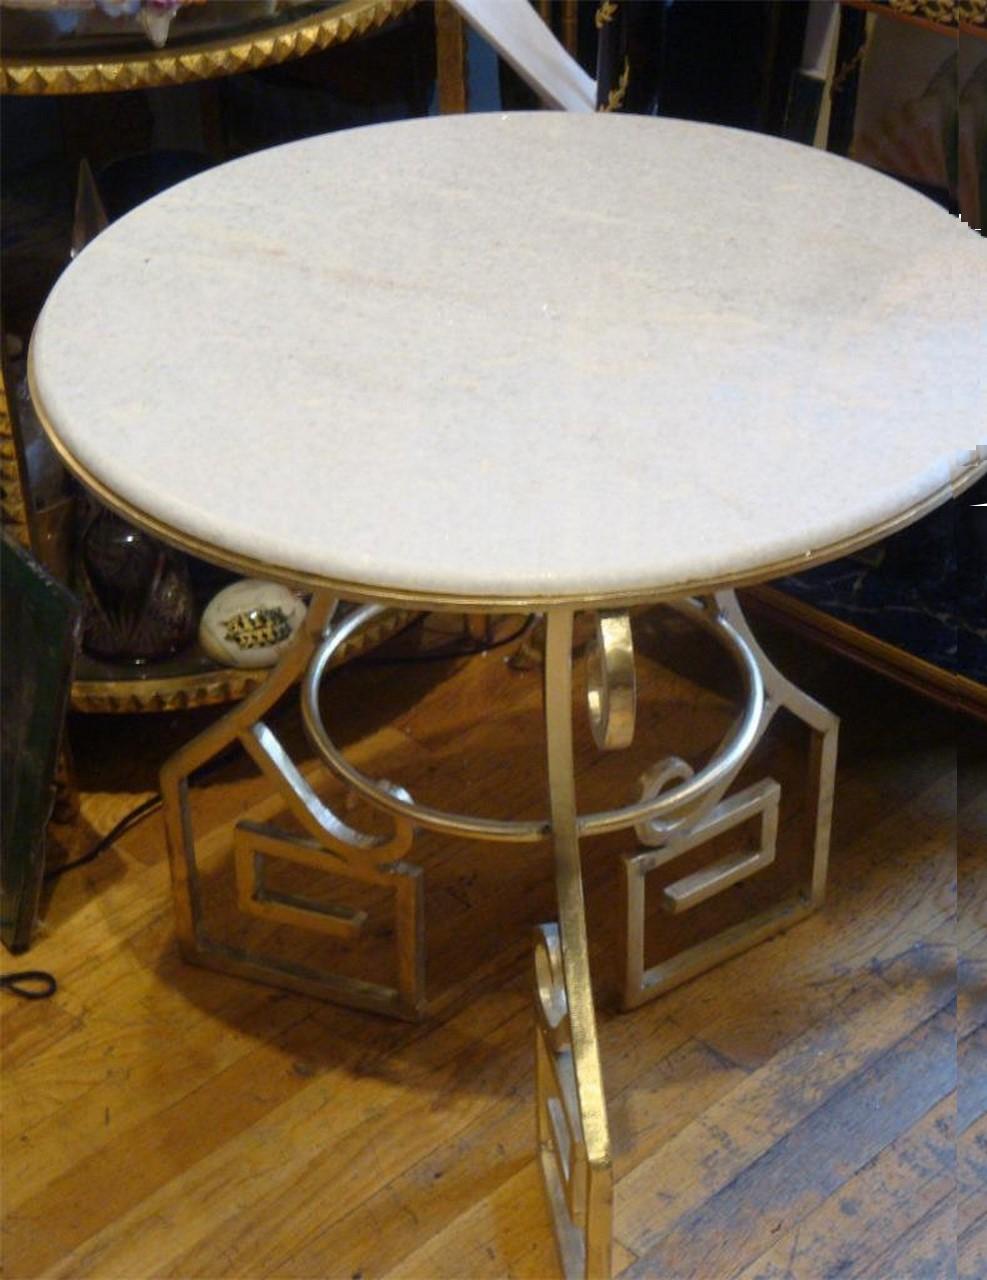 The Following Items we are Offering is this Rare Outstanding Important Art Nouveau style White Gueridon Marble Top Side Table. Beautiful Round Marble Top placed on a Gilt Gold Leaf Turned Handled Base. Among the Contents taken out of an Important